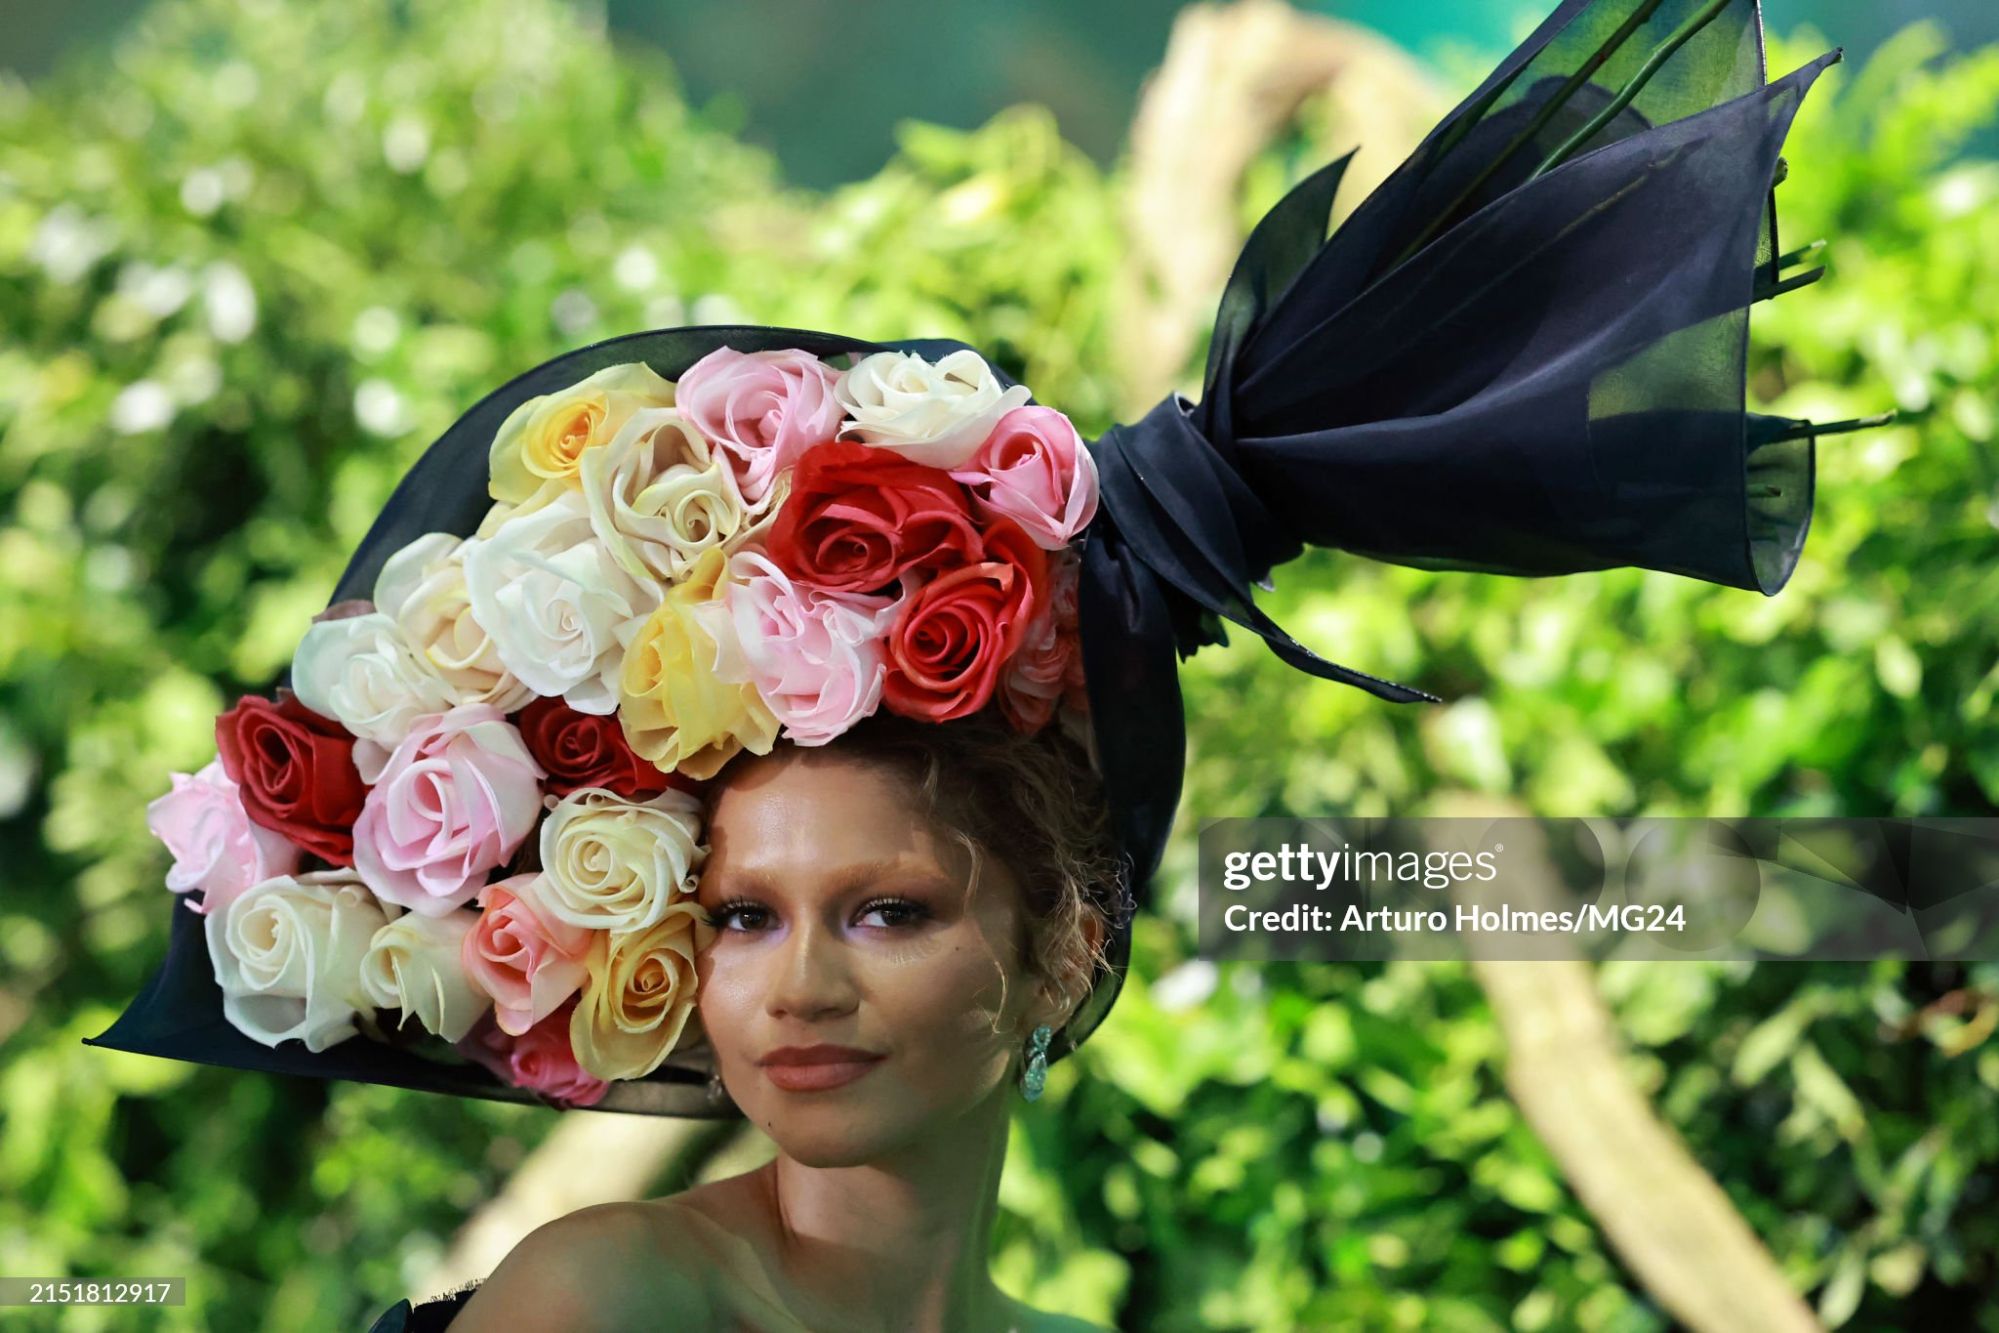 gettyimages-2151812917-2048x2048.jpg